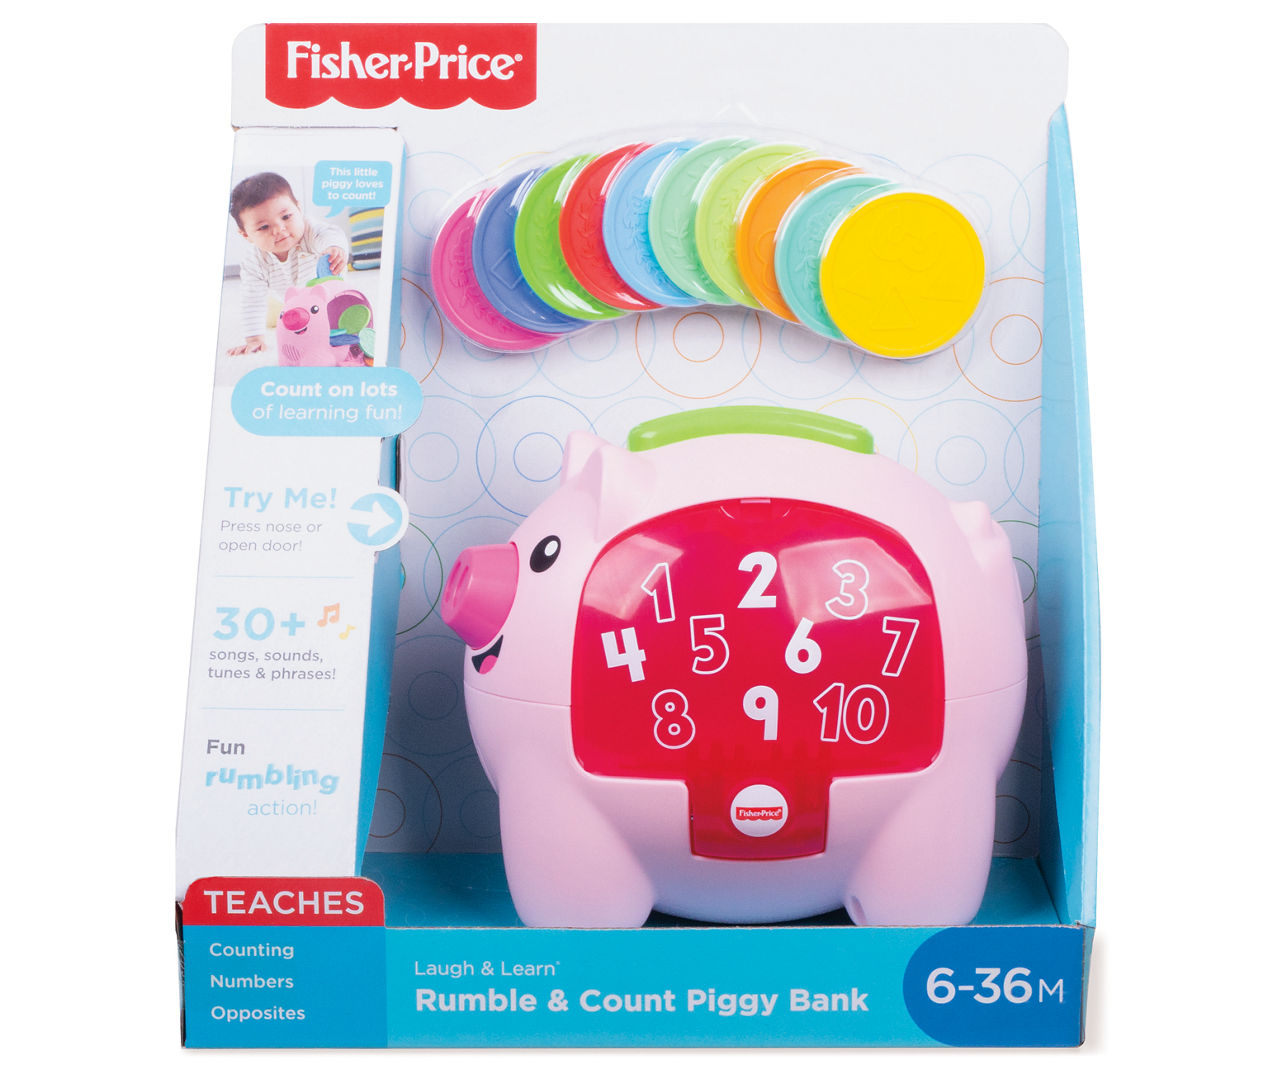 ‎Multicolor Fisher-Price GJC68 Laugh & Learn Count & Rumble Piggy Bank 